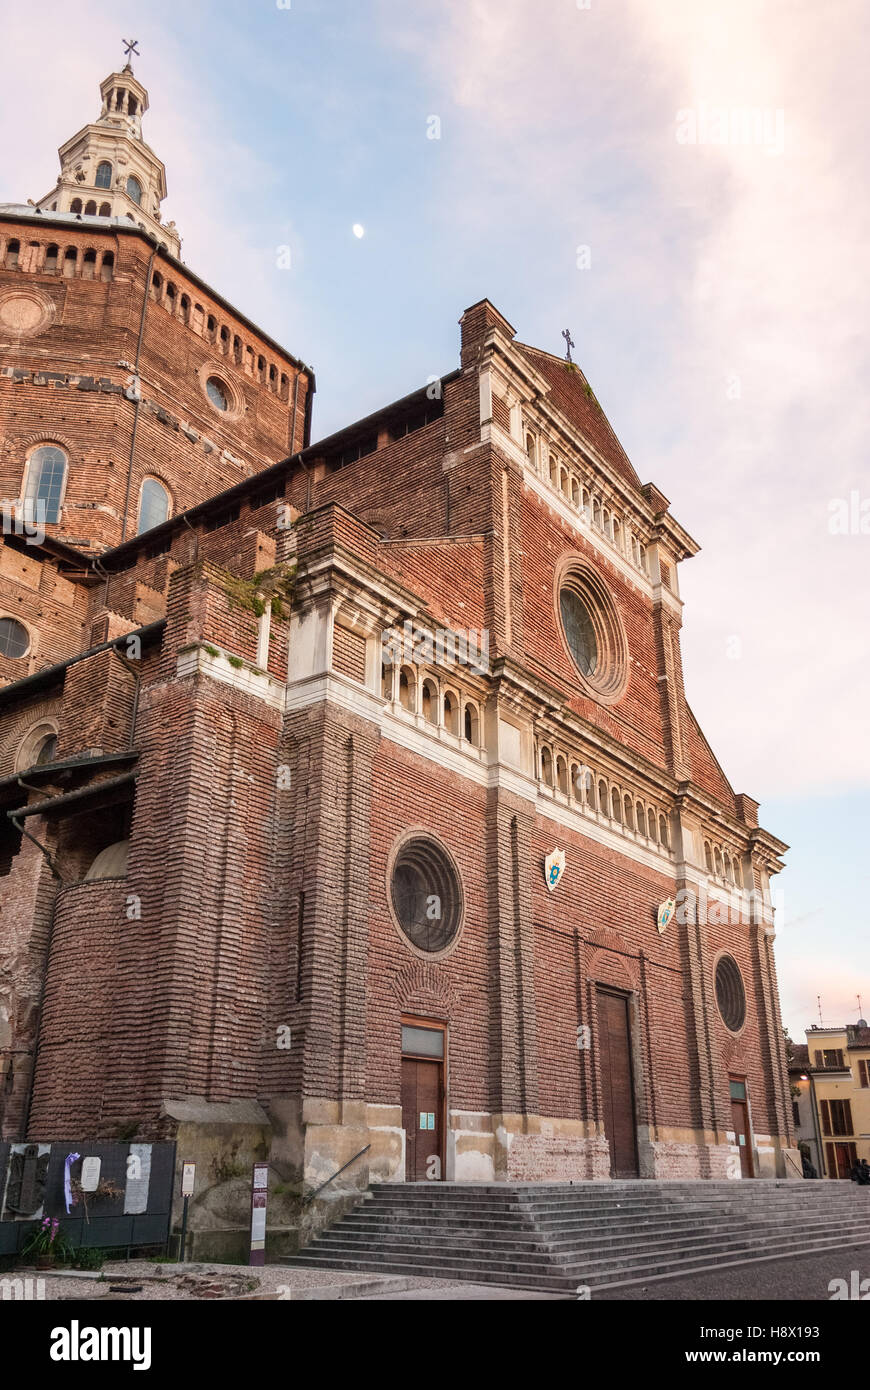 The cathedral of Pavia (Lombardy, Italy) Stock Photo